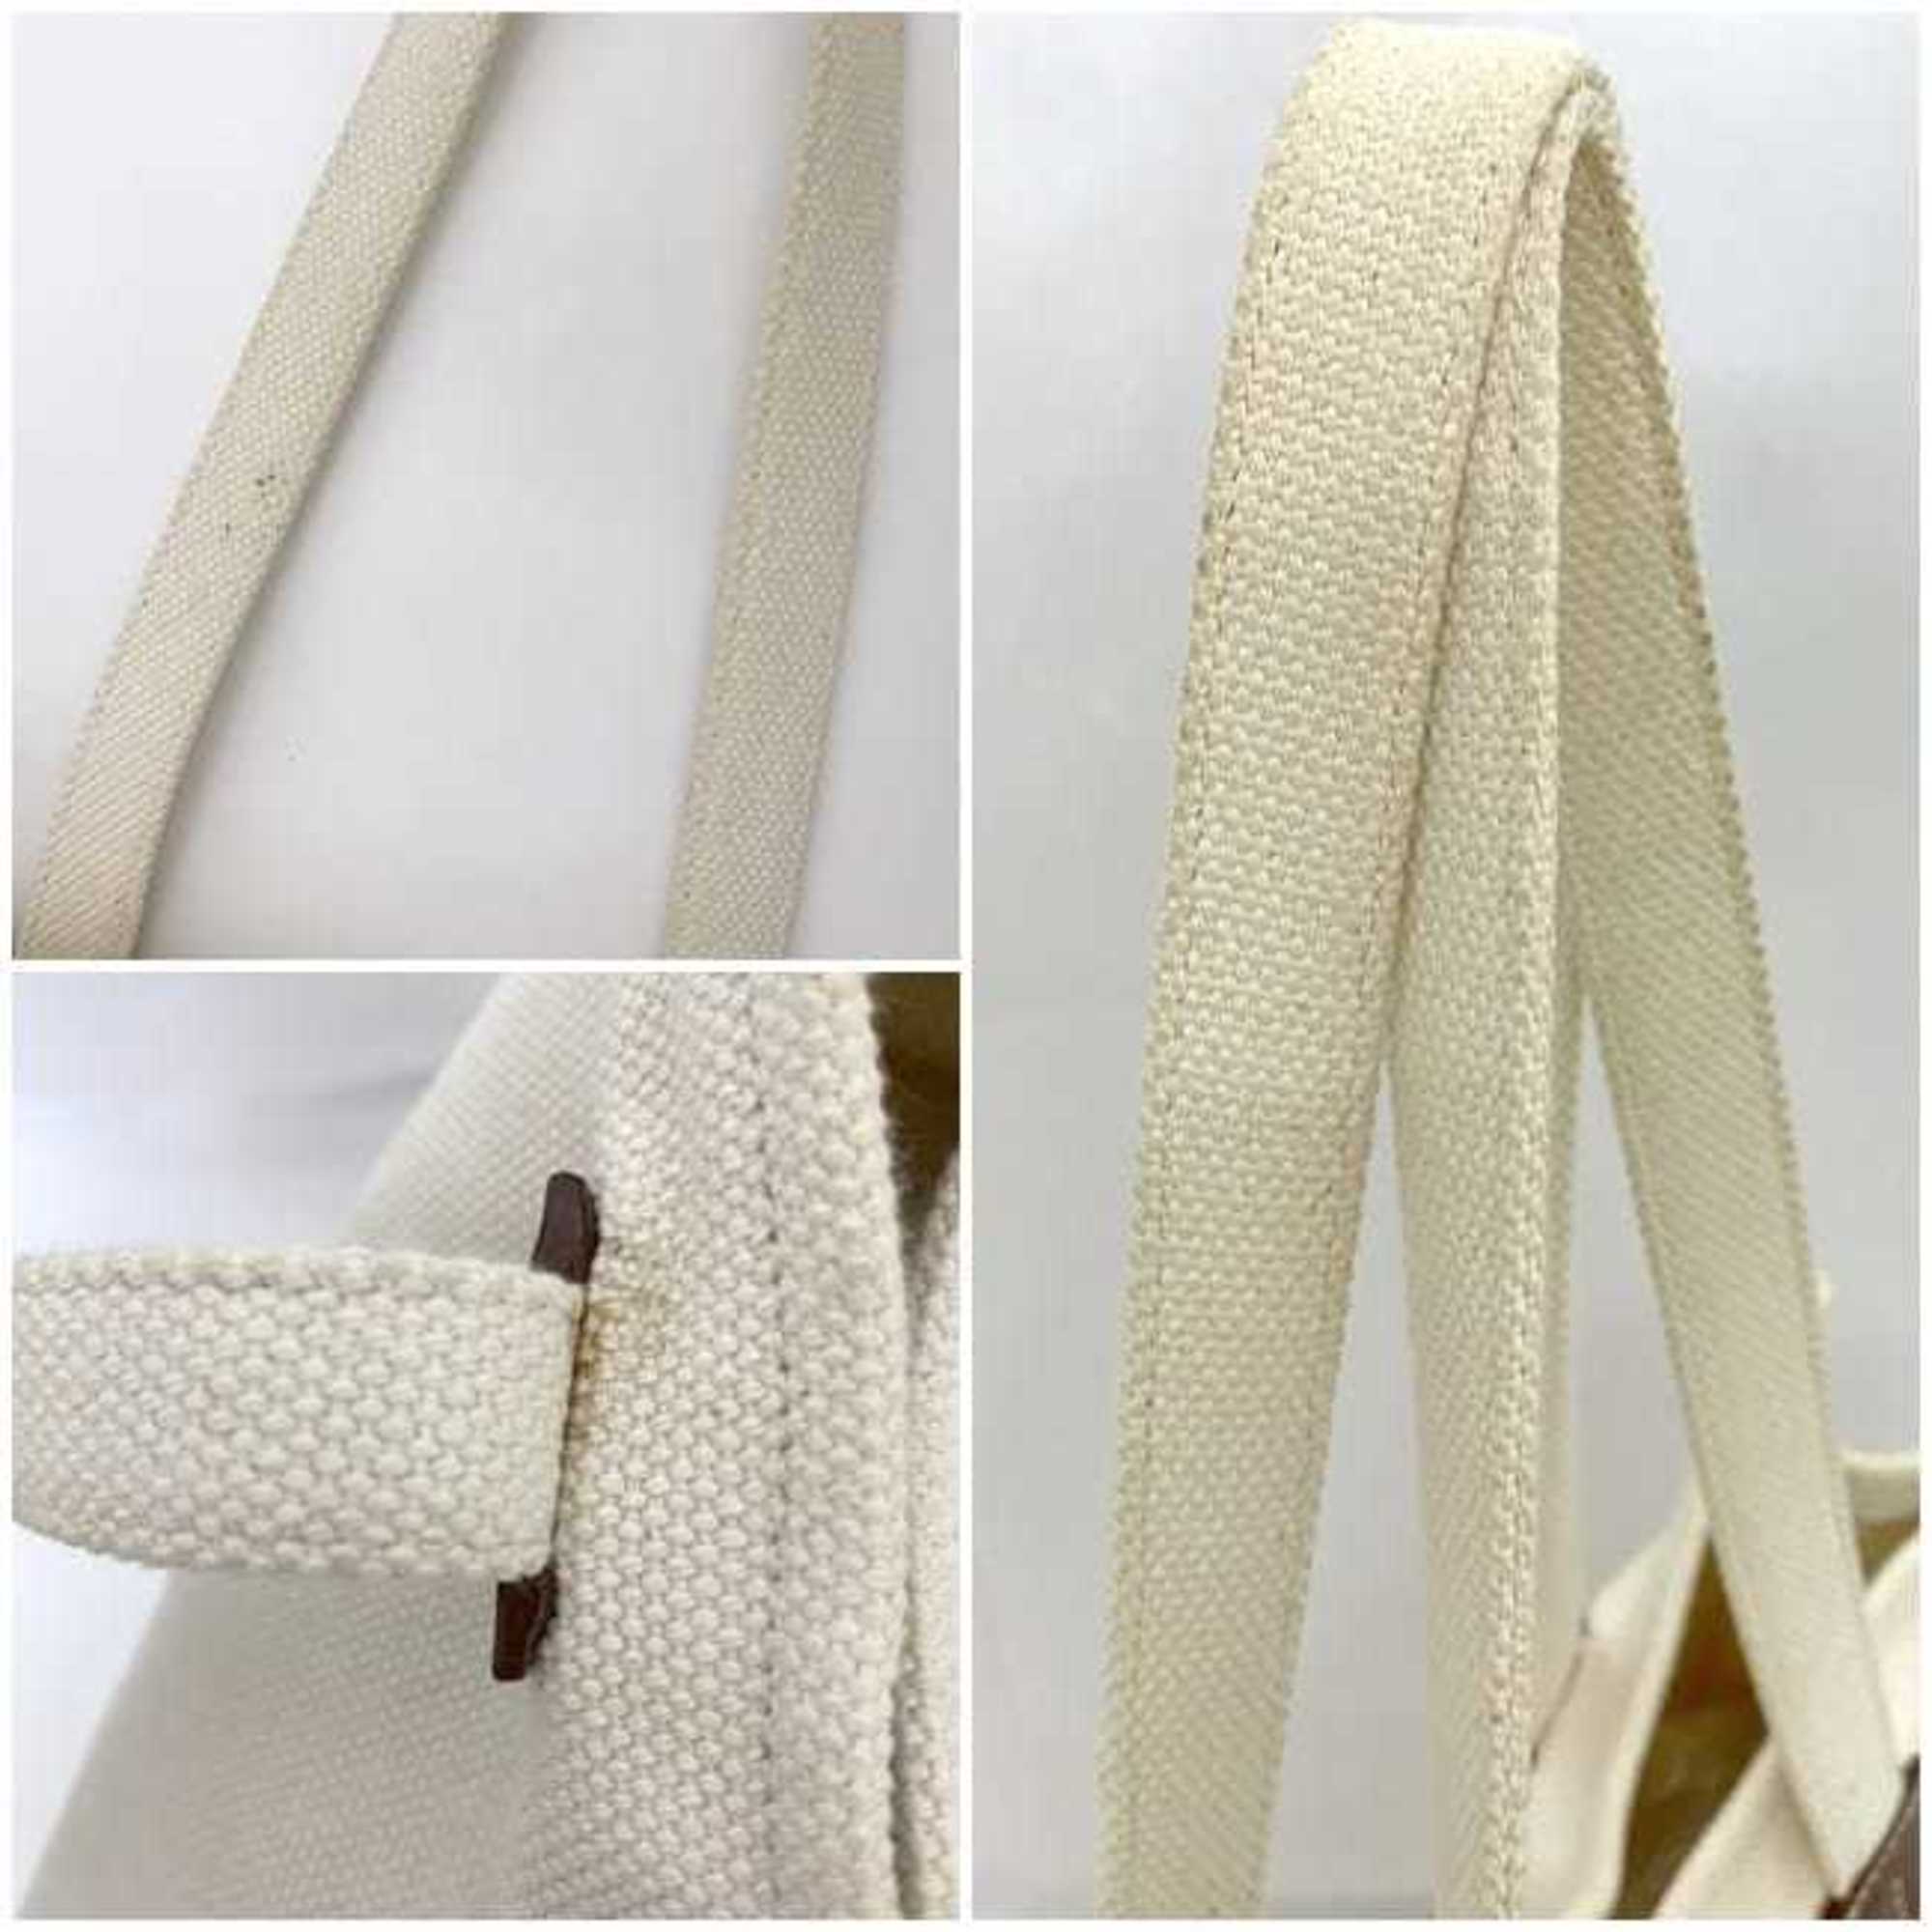 BALLY Tote Bag Natural White Brown 6236963 00349 ec-20543 Cotton Canvas Leather Women's